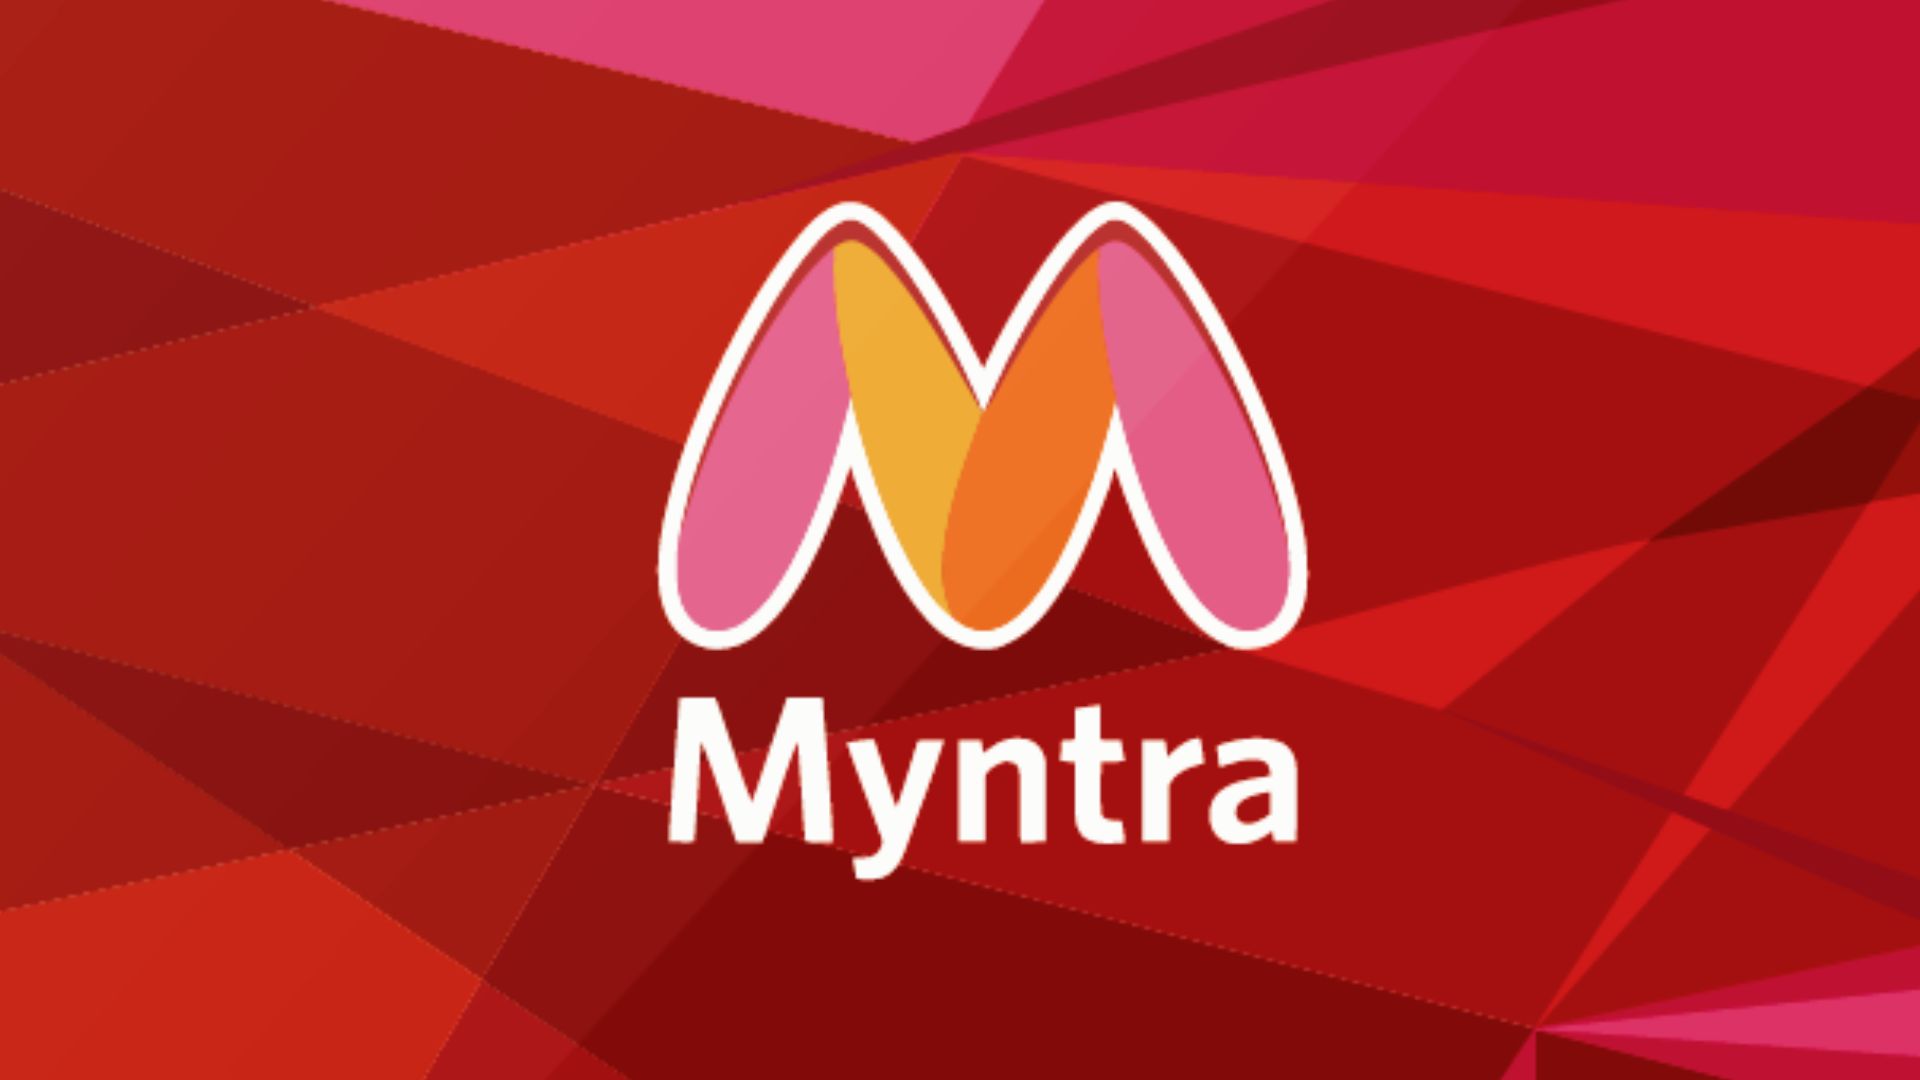 How to Redeem Myntra Gift Card in 2 Minutes?